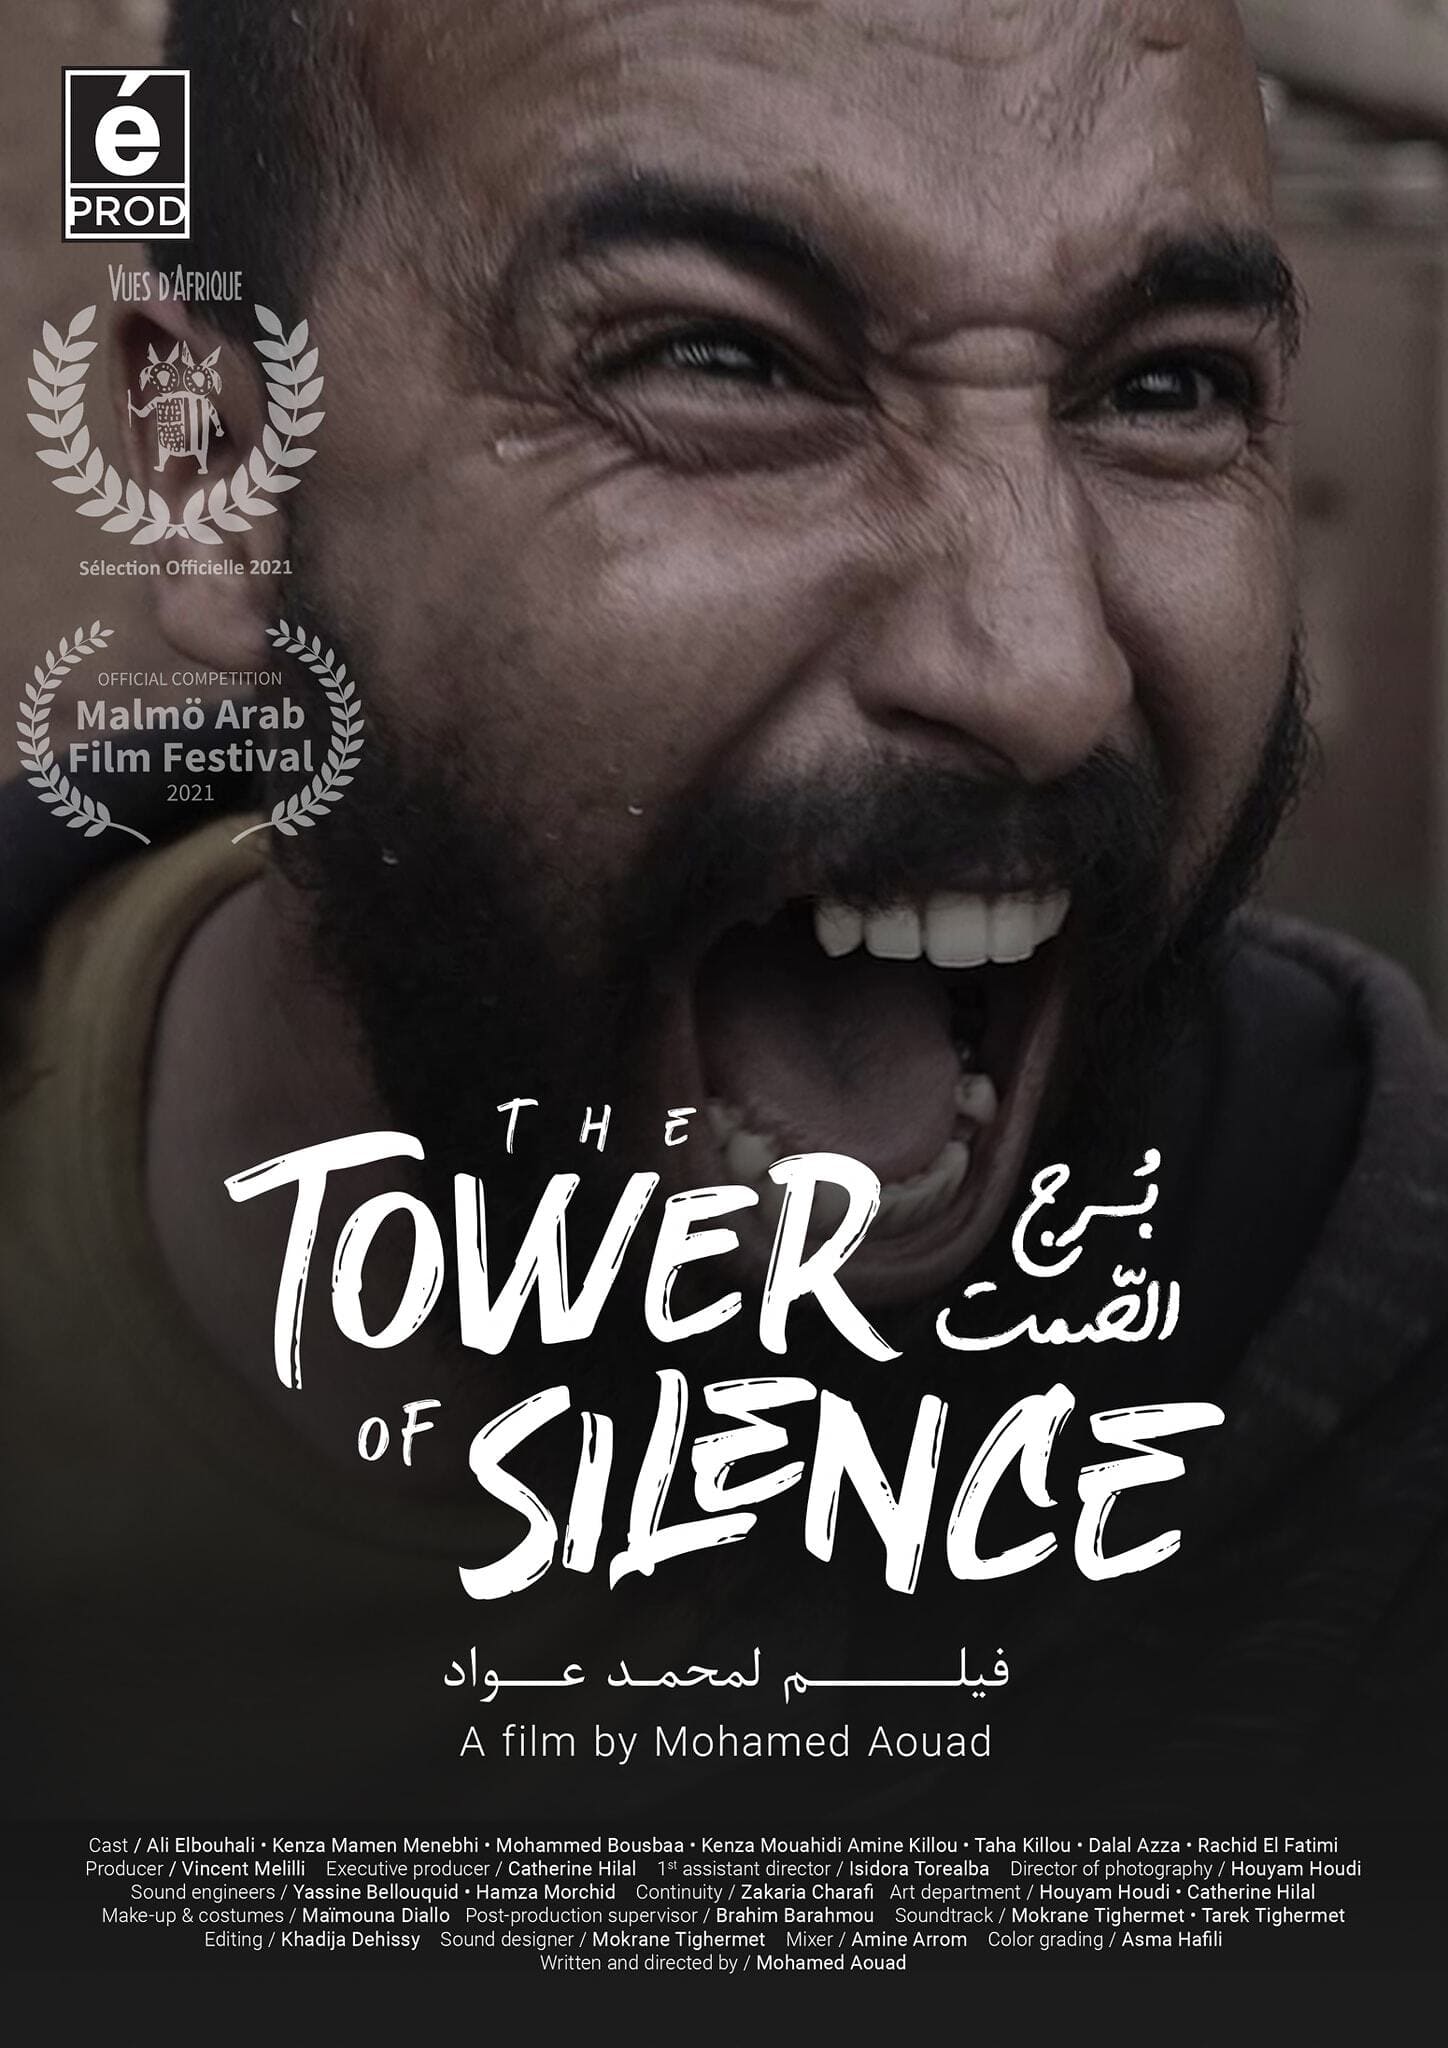 The Tower of Silence